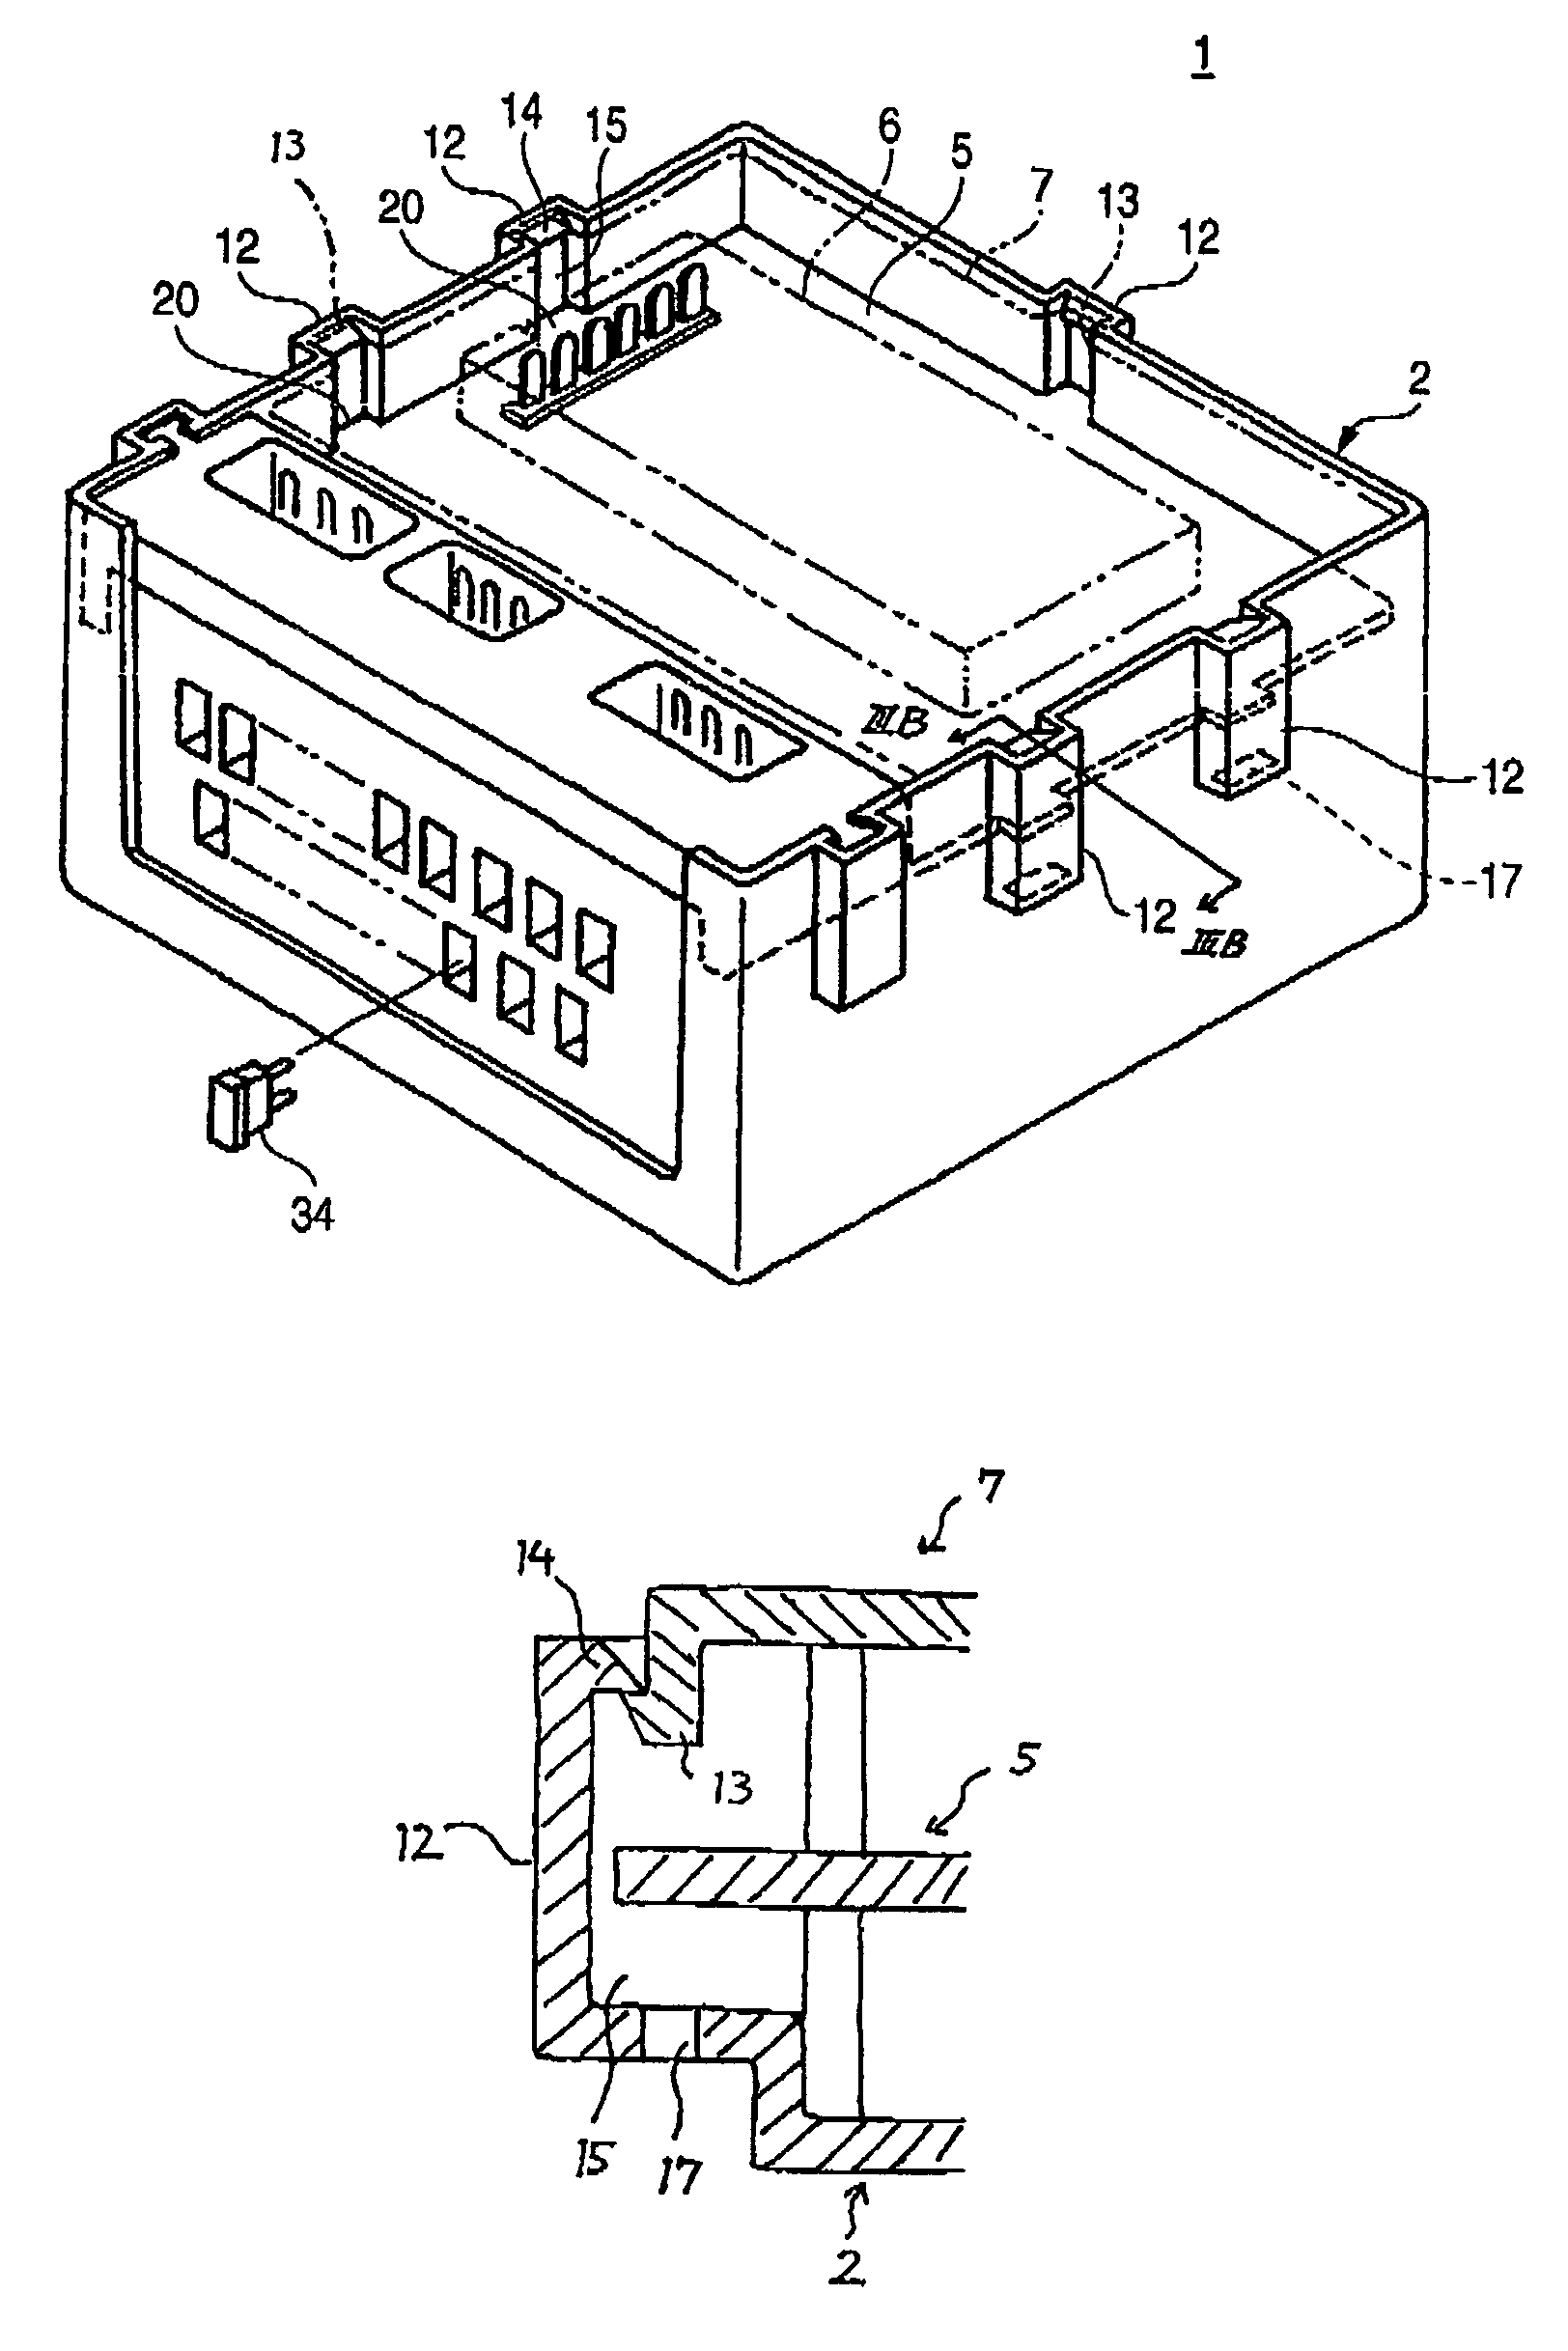 Waterproof structure of electric junction box